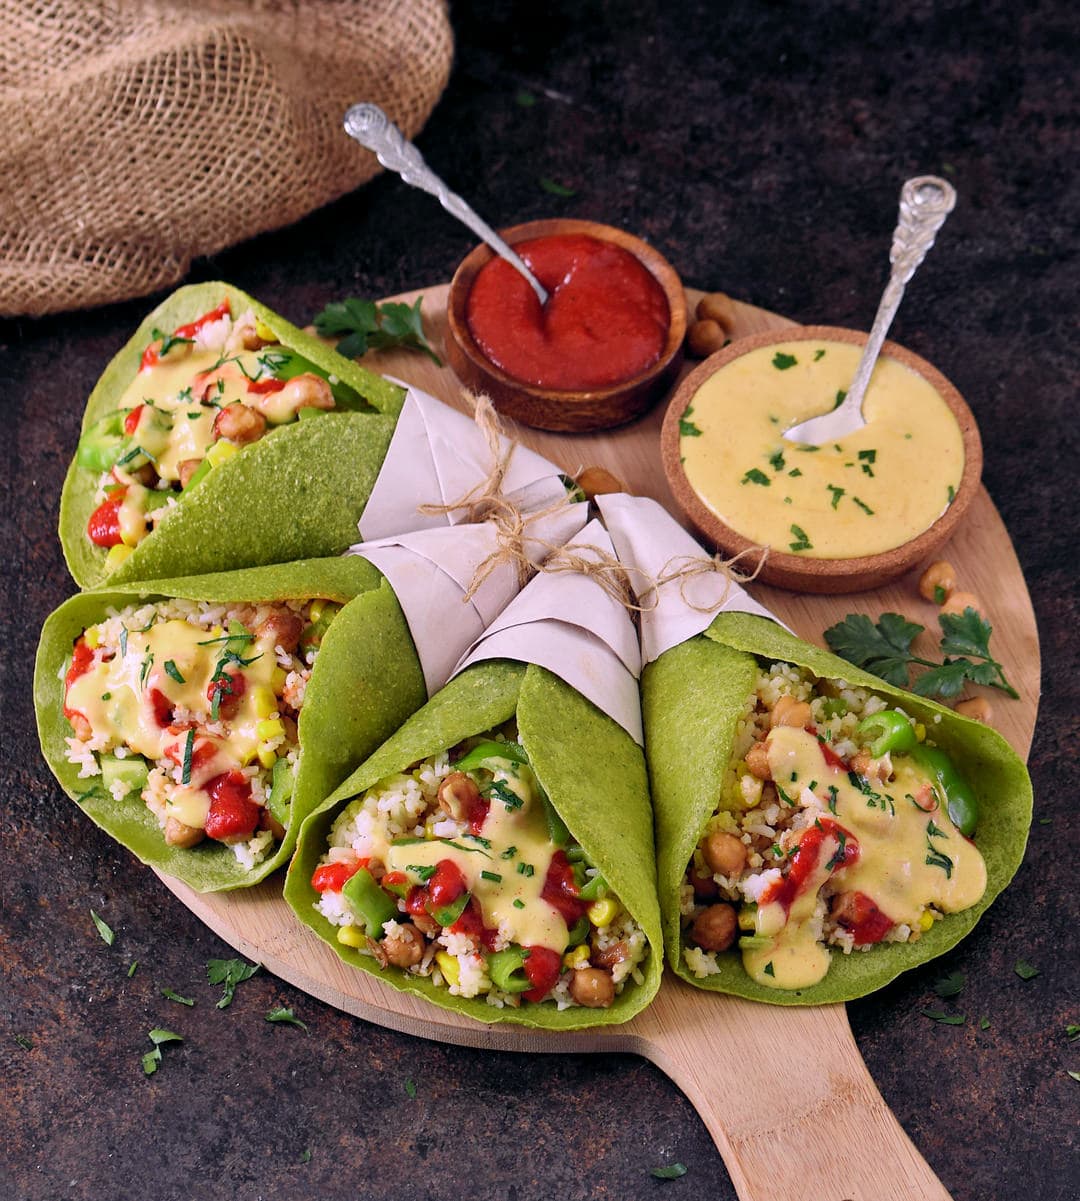 Spinach tortillas with vegan cheese sauce and veggies on a cutting board